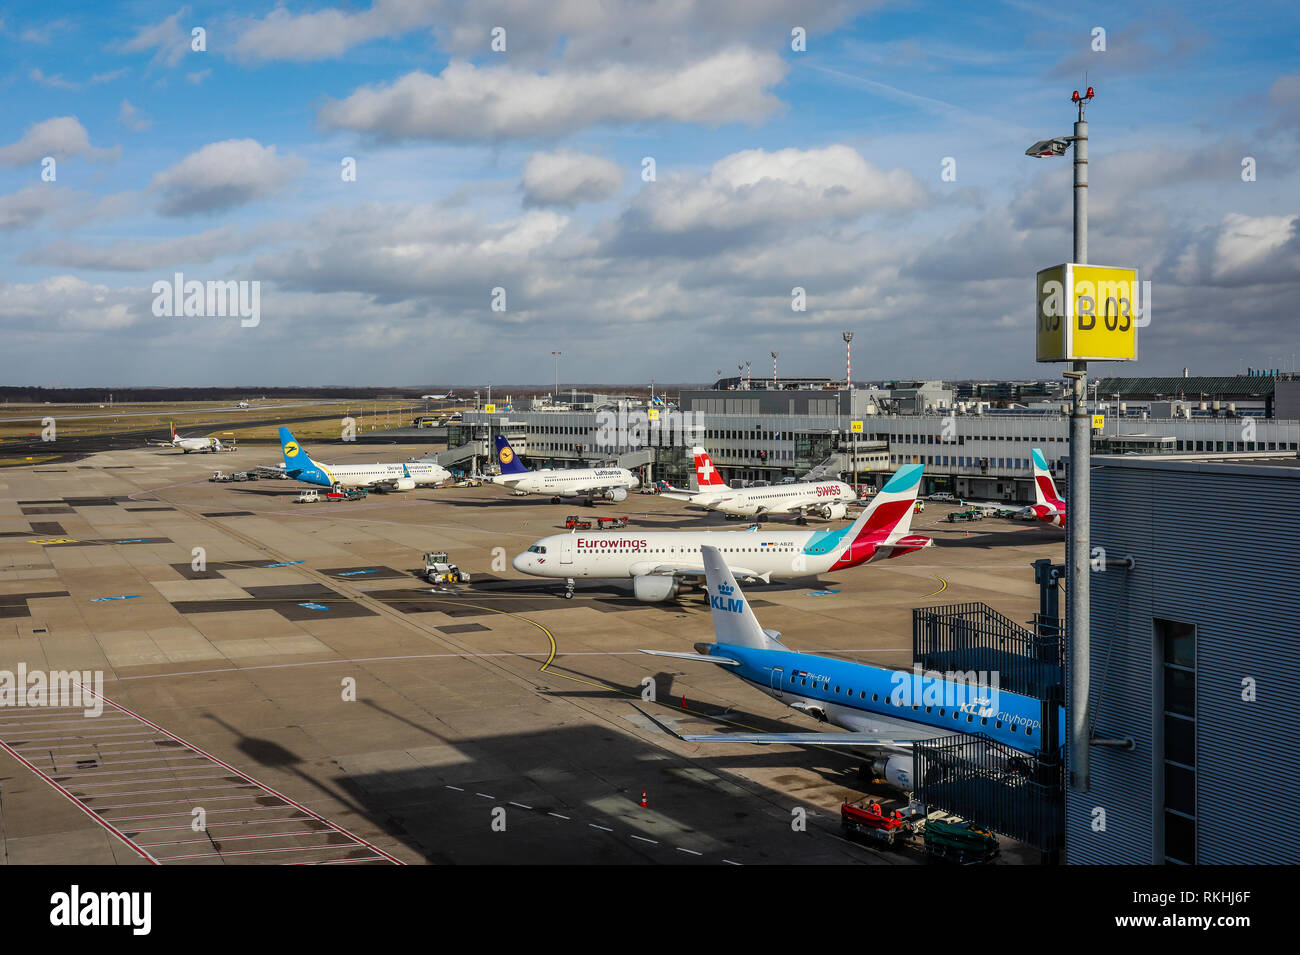 Duesseldorf, North Rhine-Westphalia, Germany - Duesseldorf International Airport, DUS, aircraft from SWISS, Eurowings, Lufthansa and KLM are standing  Stock Photo